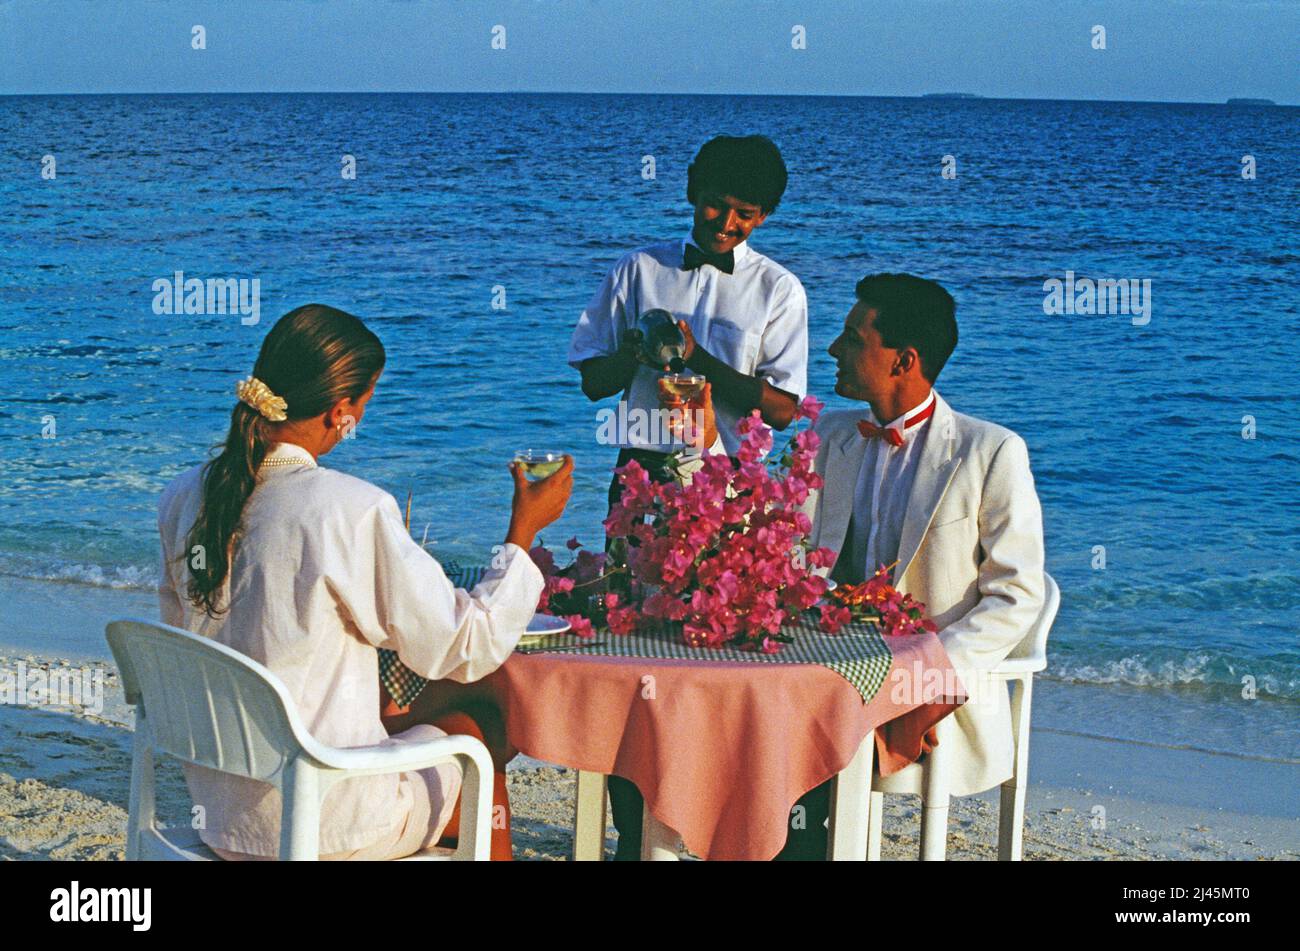 Maldives. Young couple in evening clothes being served dinner on the beach. Stock Photo